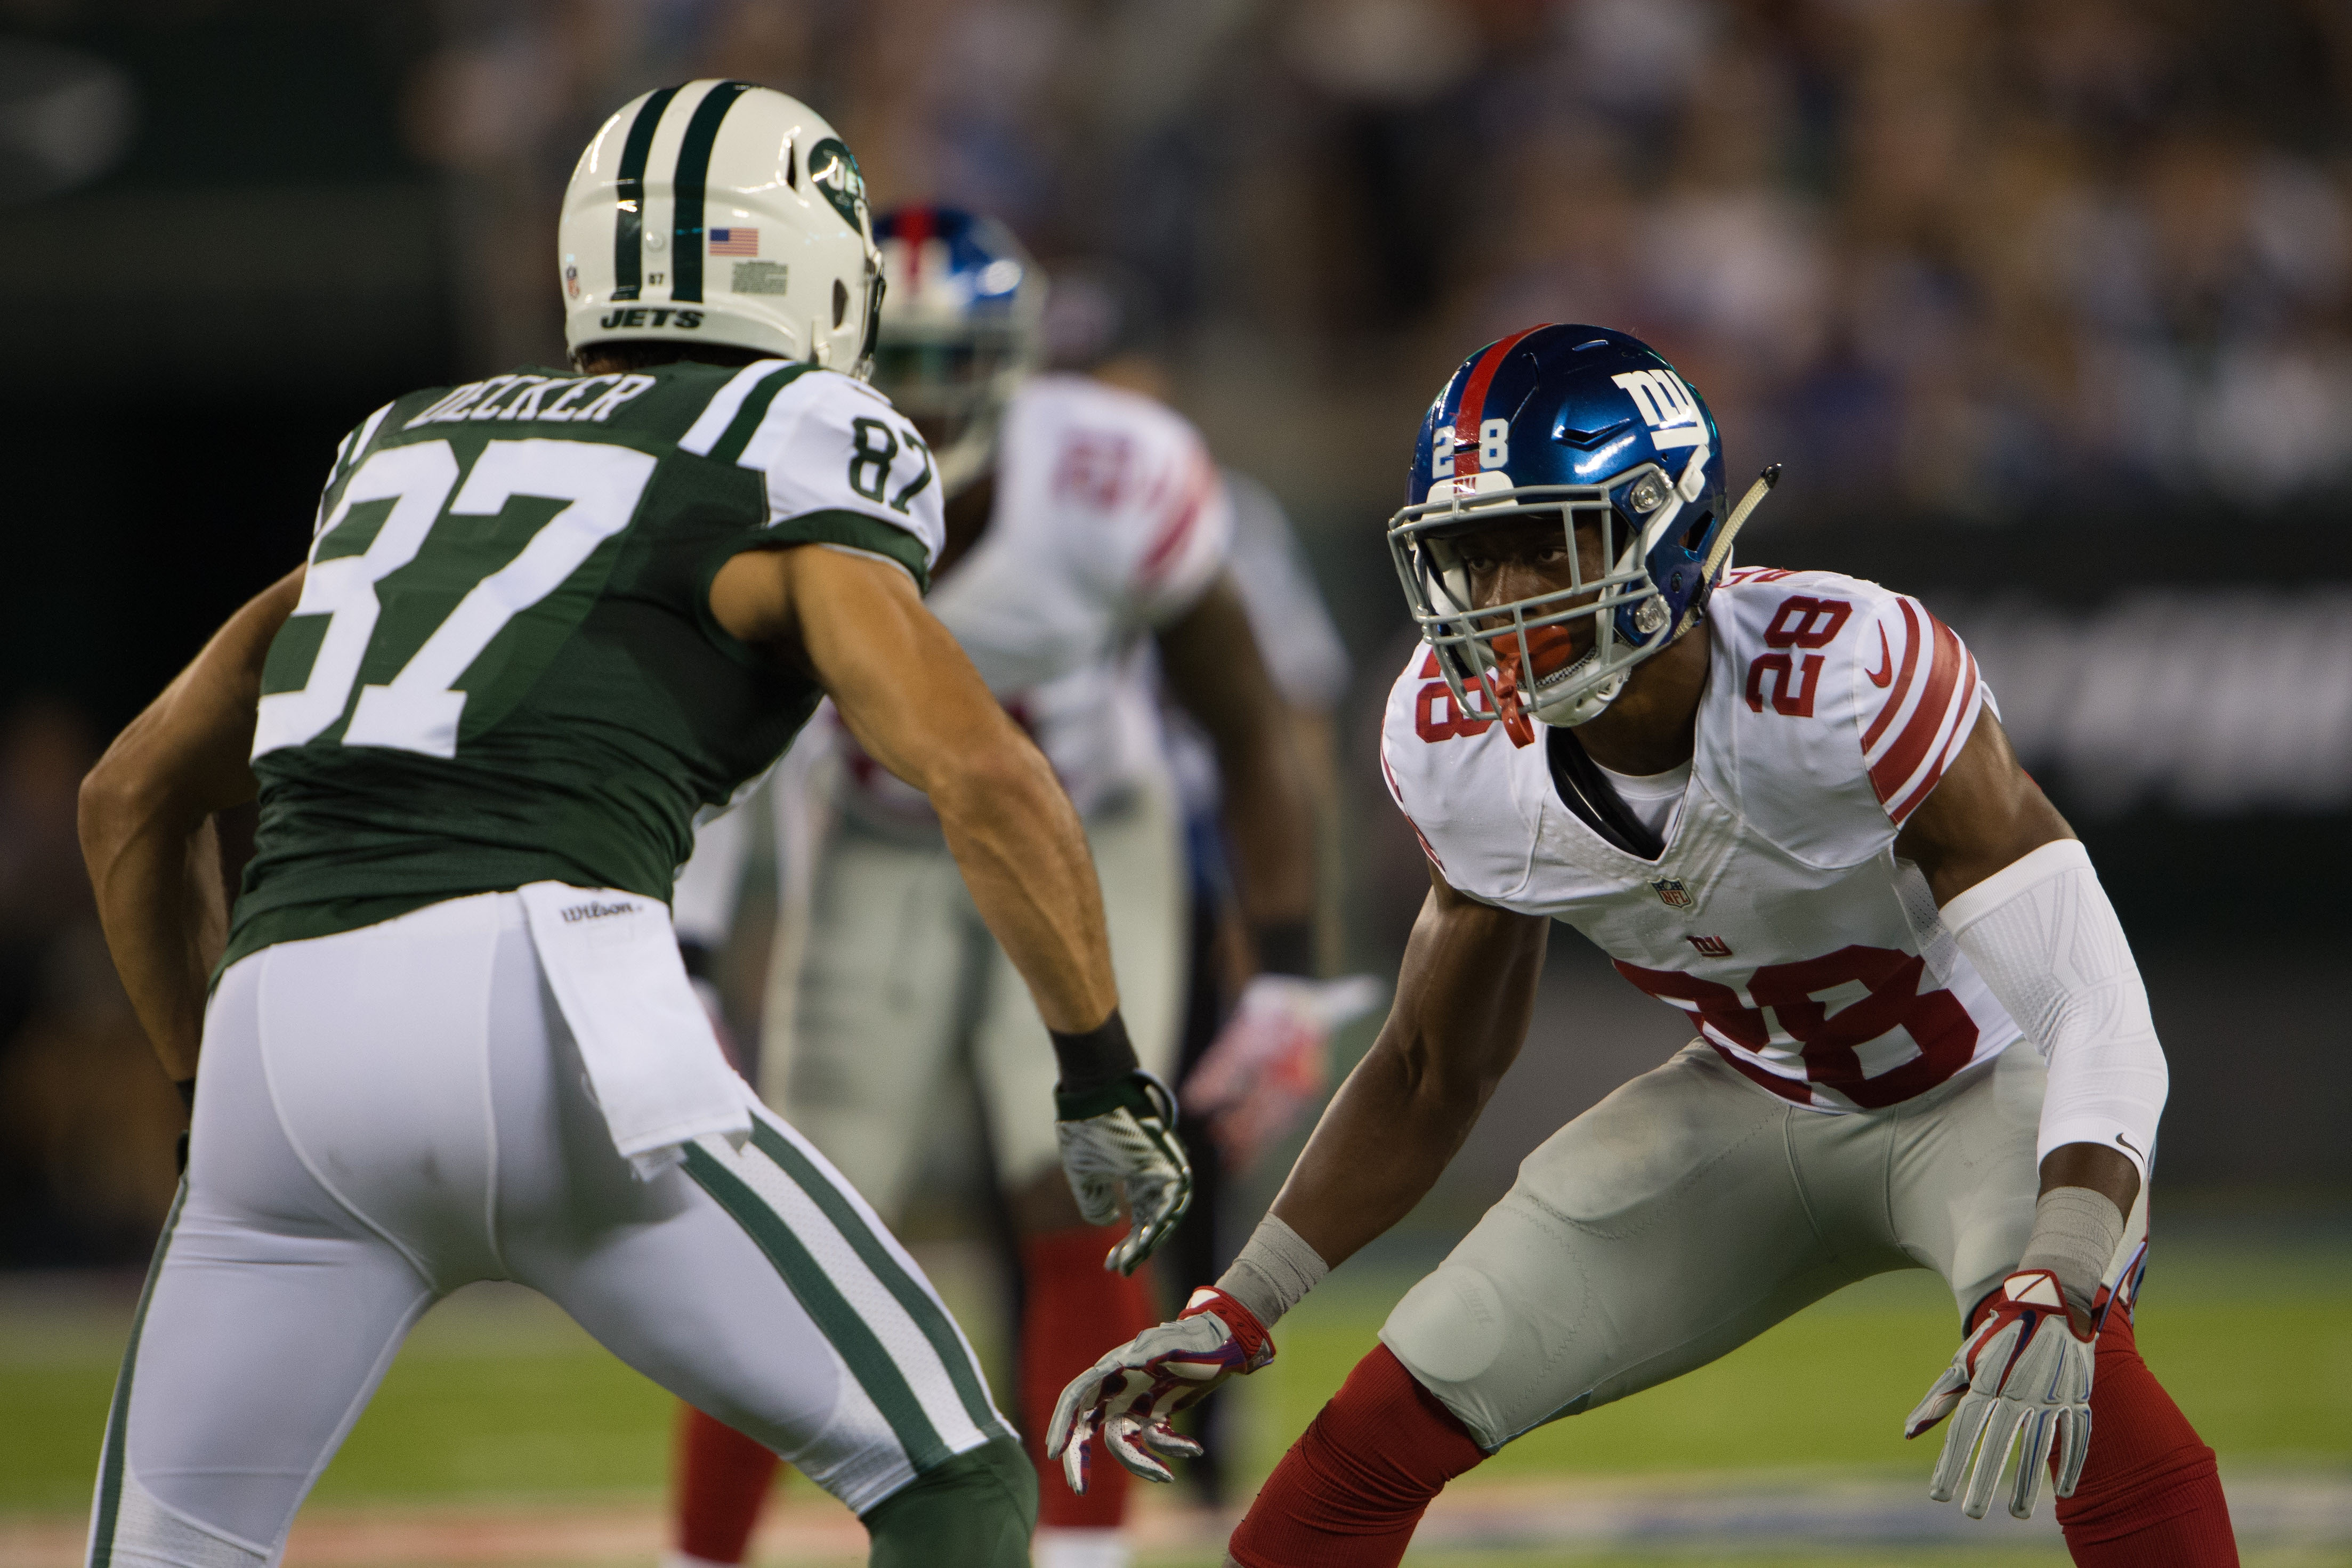 New York Giants: How Have Jerry Reese's Recent Draft Picks Fared? 